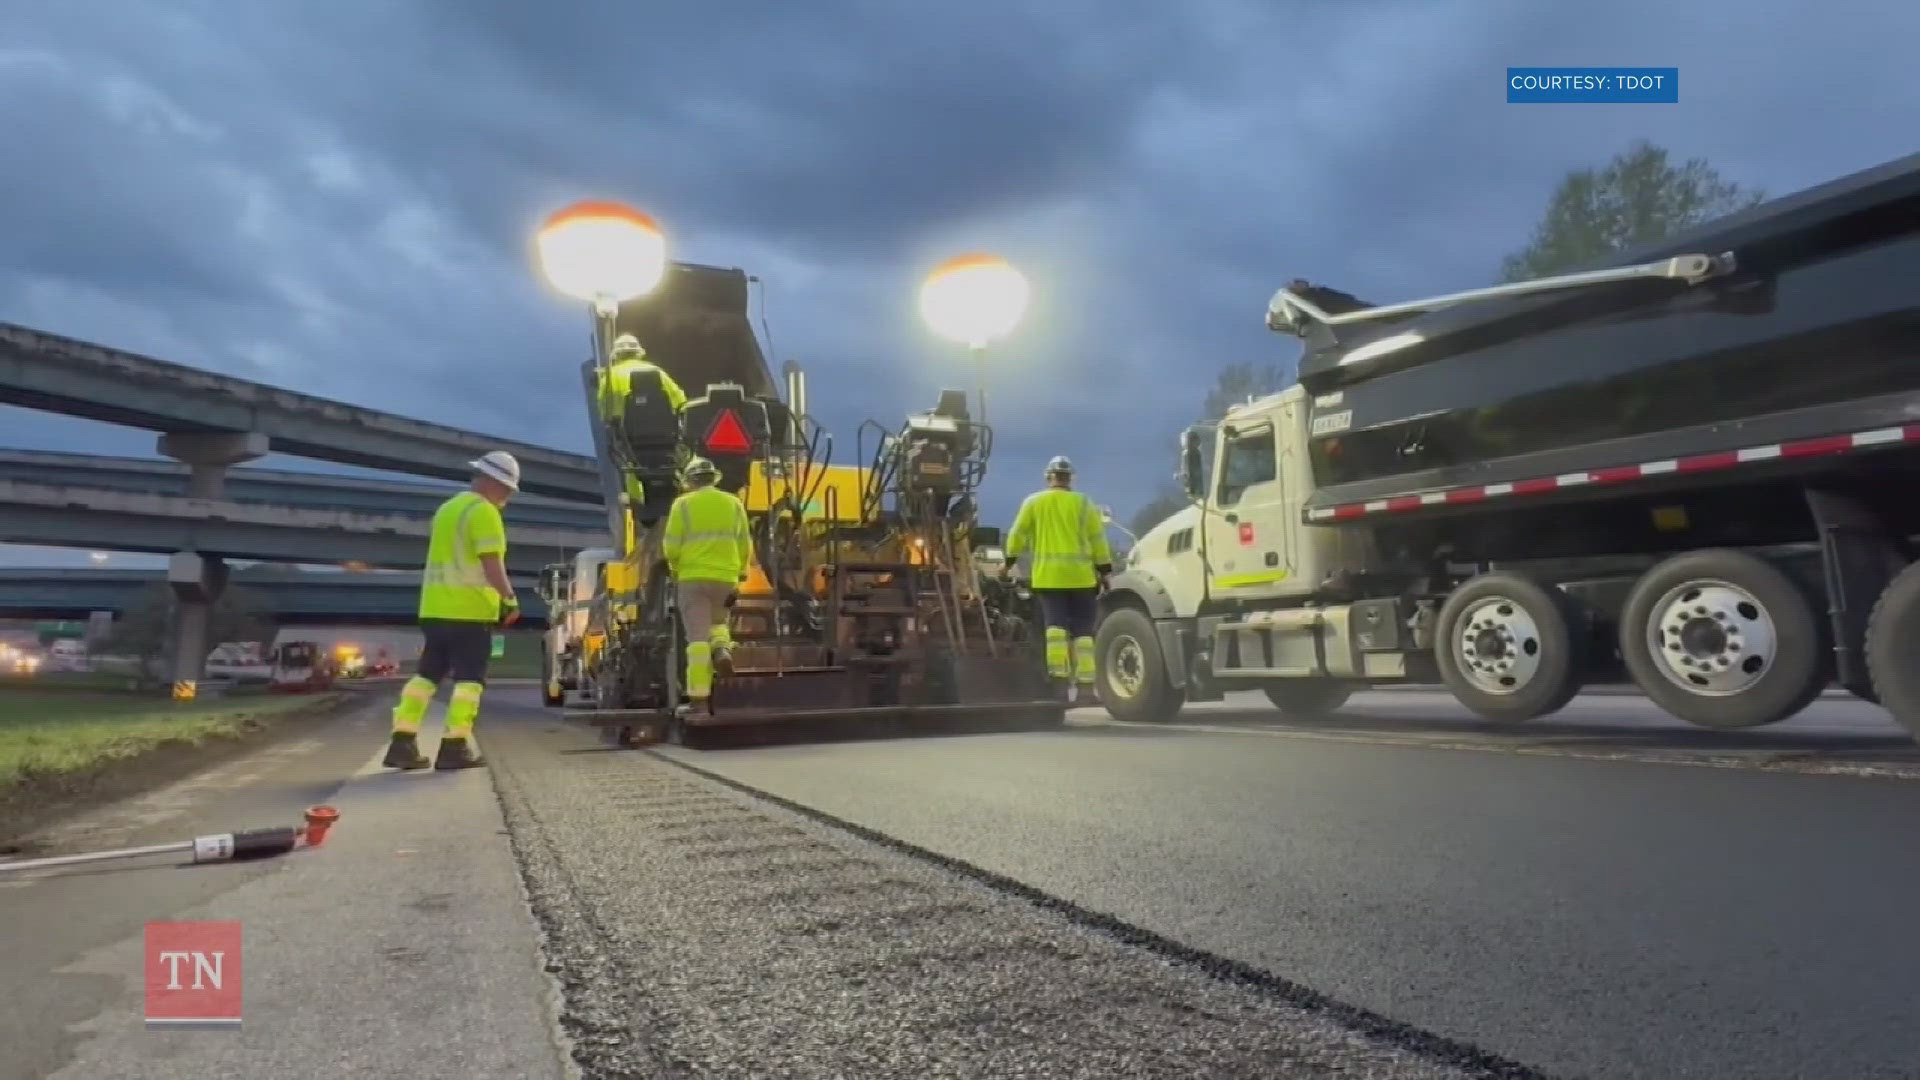 As the temperatures warm up, you'll notice more TDOT crews fixing potholes on state roads.